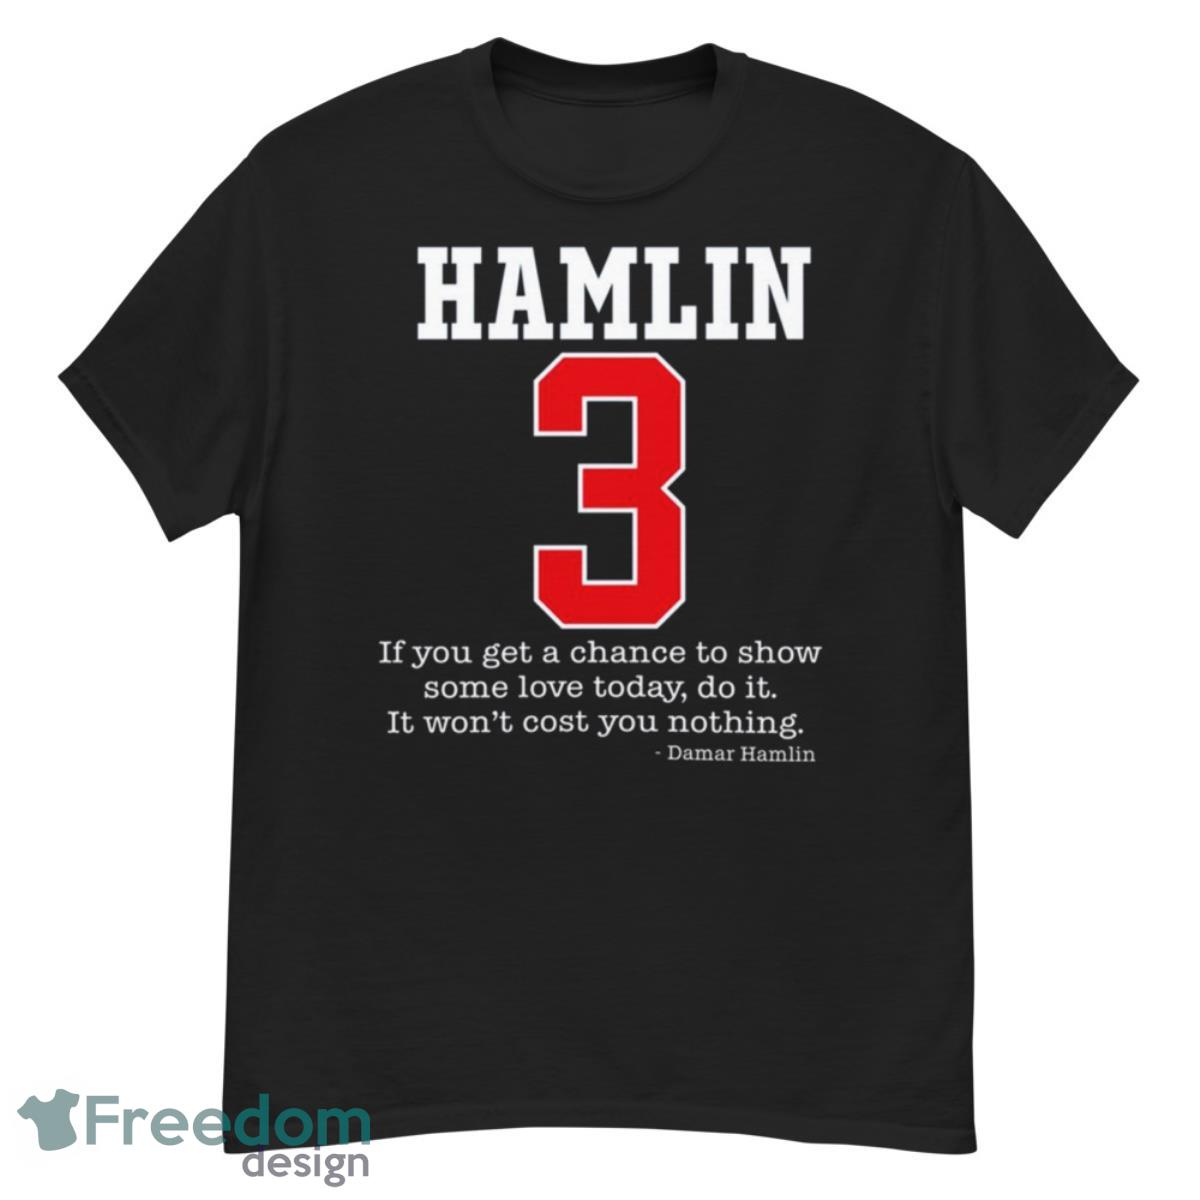 Hamlin 3 if you get a chance to show some love today shirt - G500 Men’s Classic T-Shirt